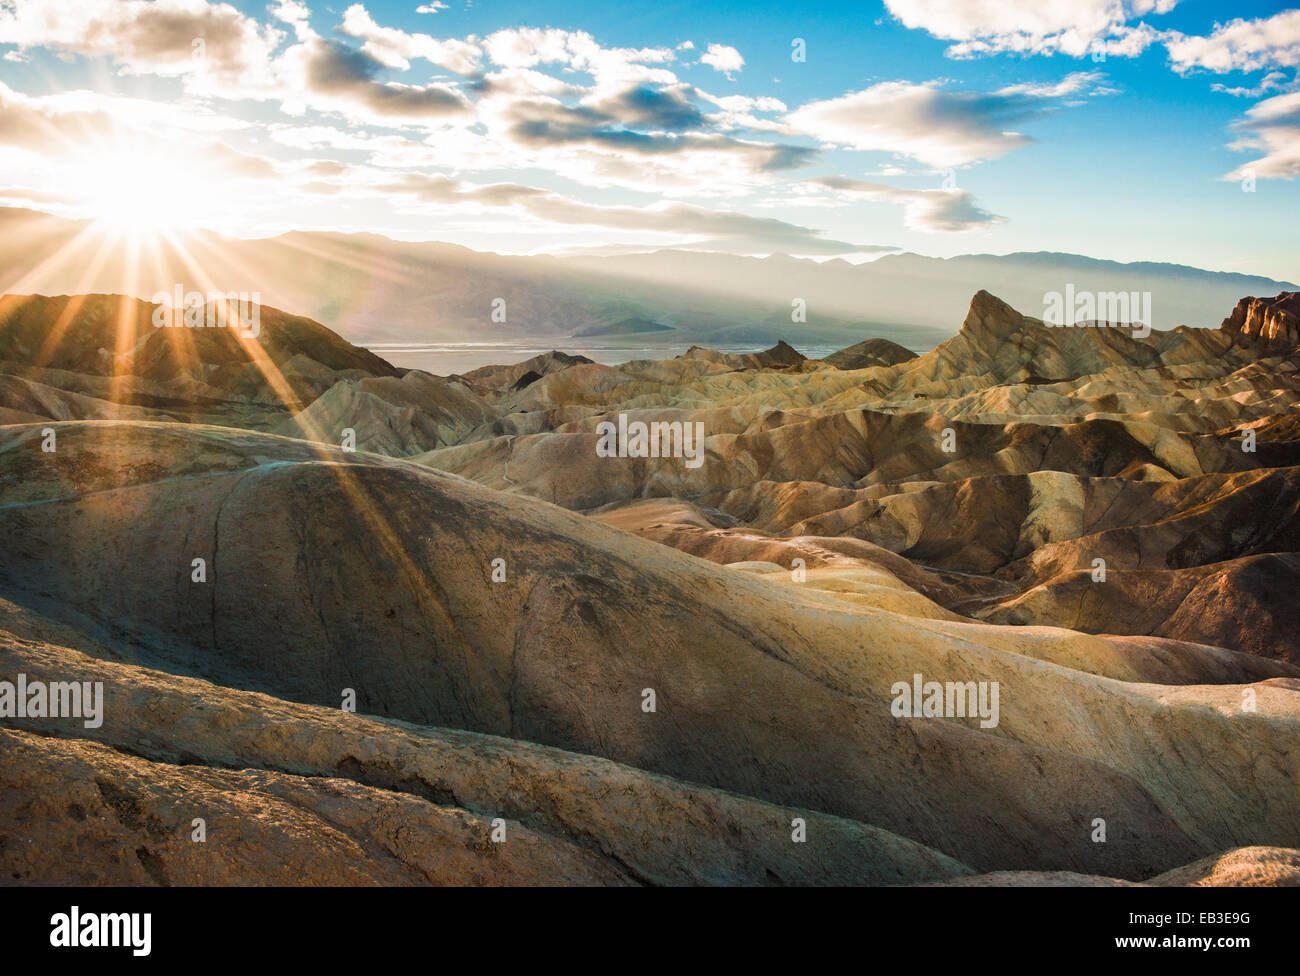 Zabriskie Point trail at sunset, Death Valley National Park, Inyo County, California, United States Stock Photo